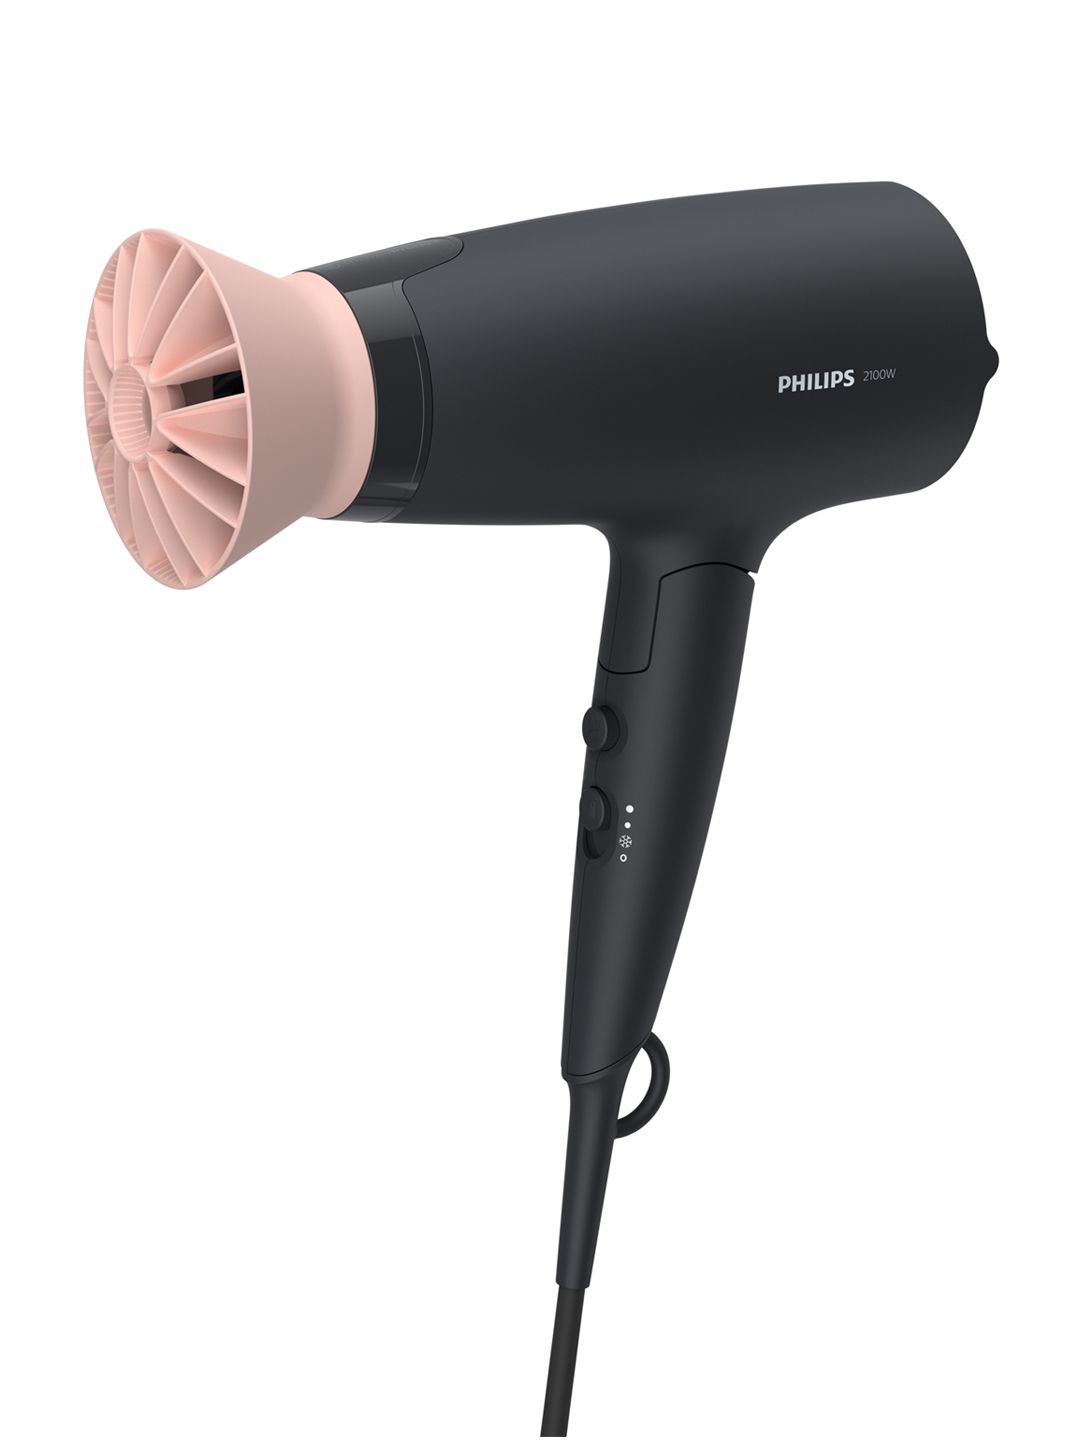 Philips Professional Hair Dryer 2100W ThermoProtect BHD356/10 Price in India